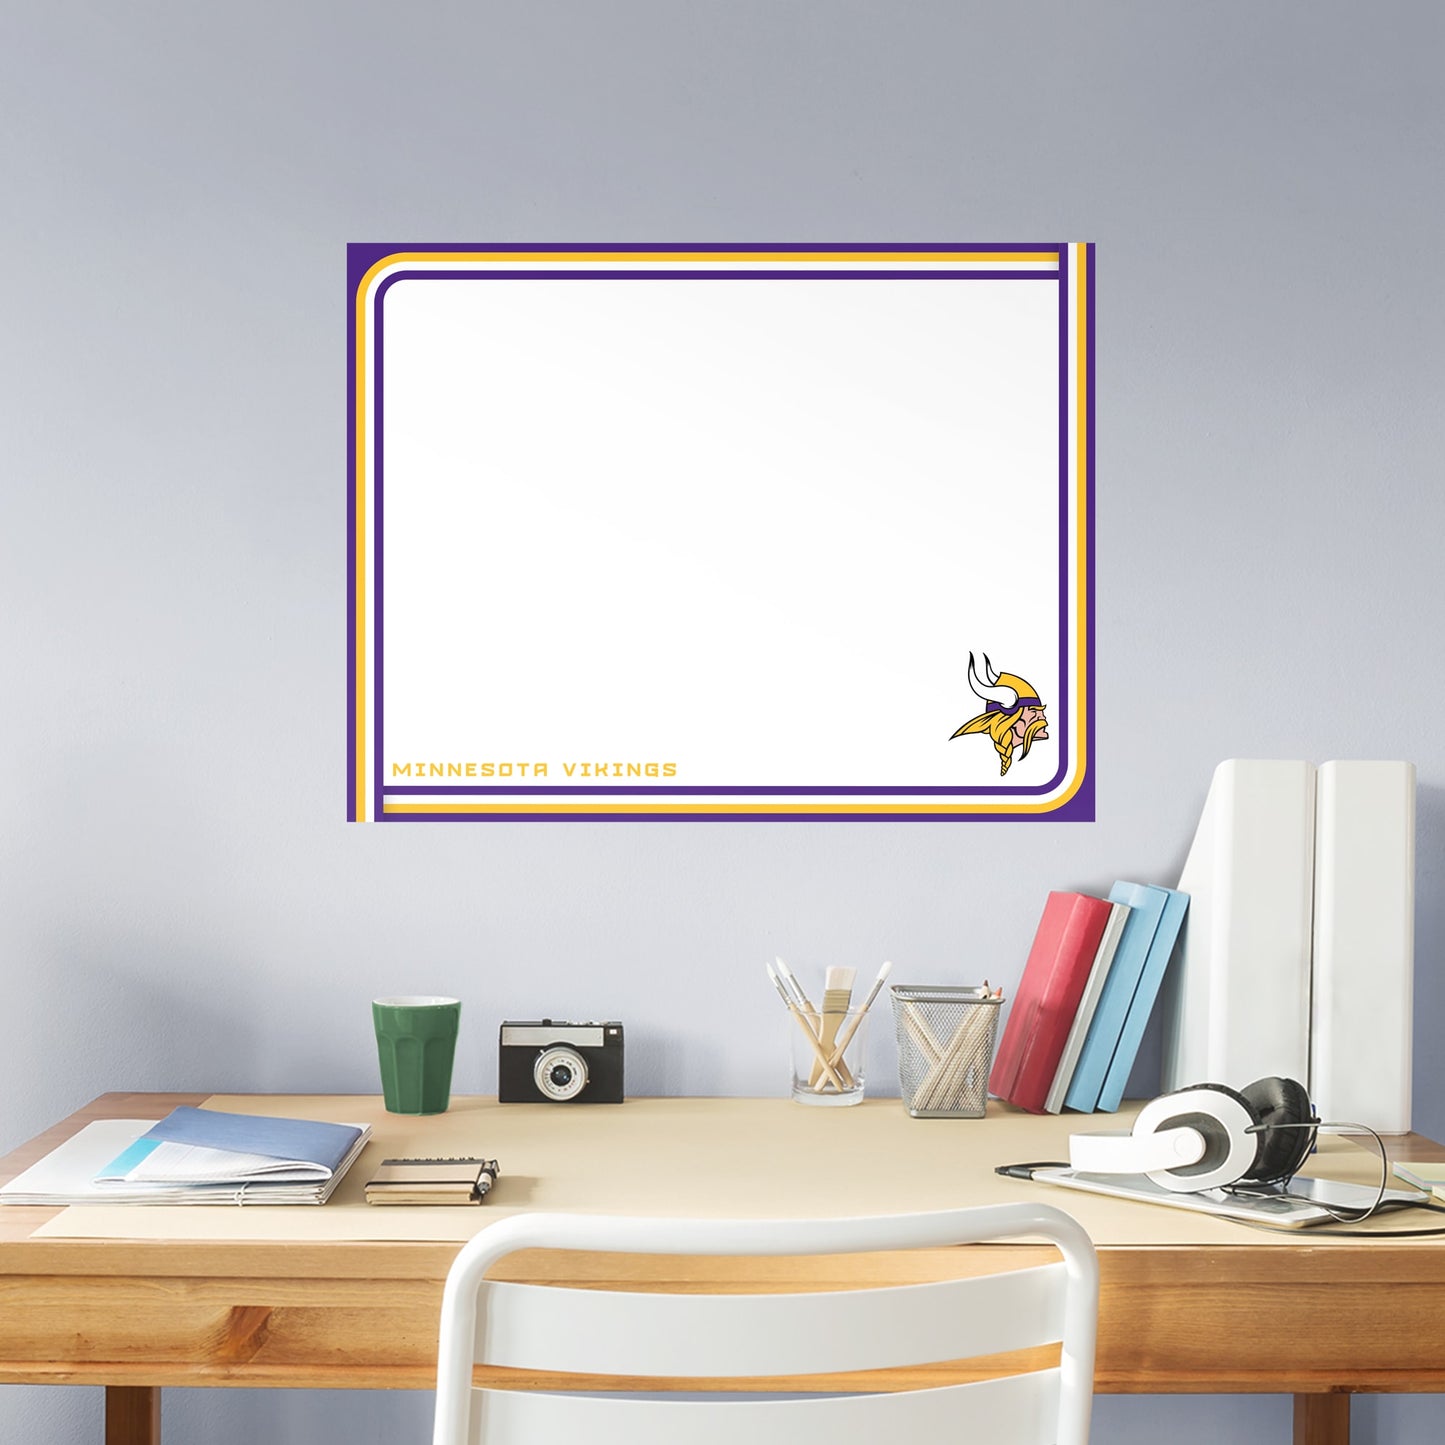 Minnesota Vikings:  Dry Erase Whiteboard        - Officially Licensed NFL Removable Wall   Adhesive Decal